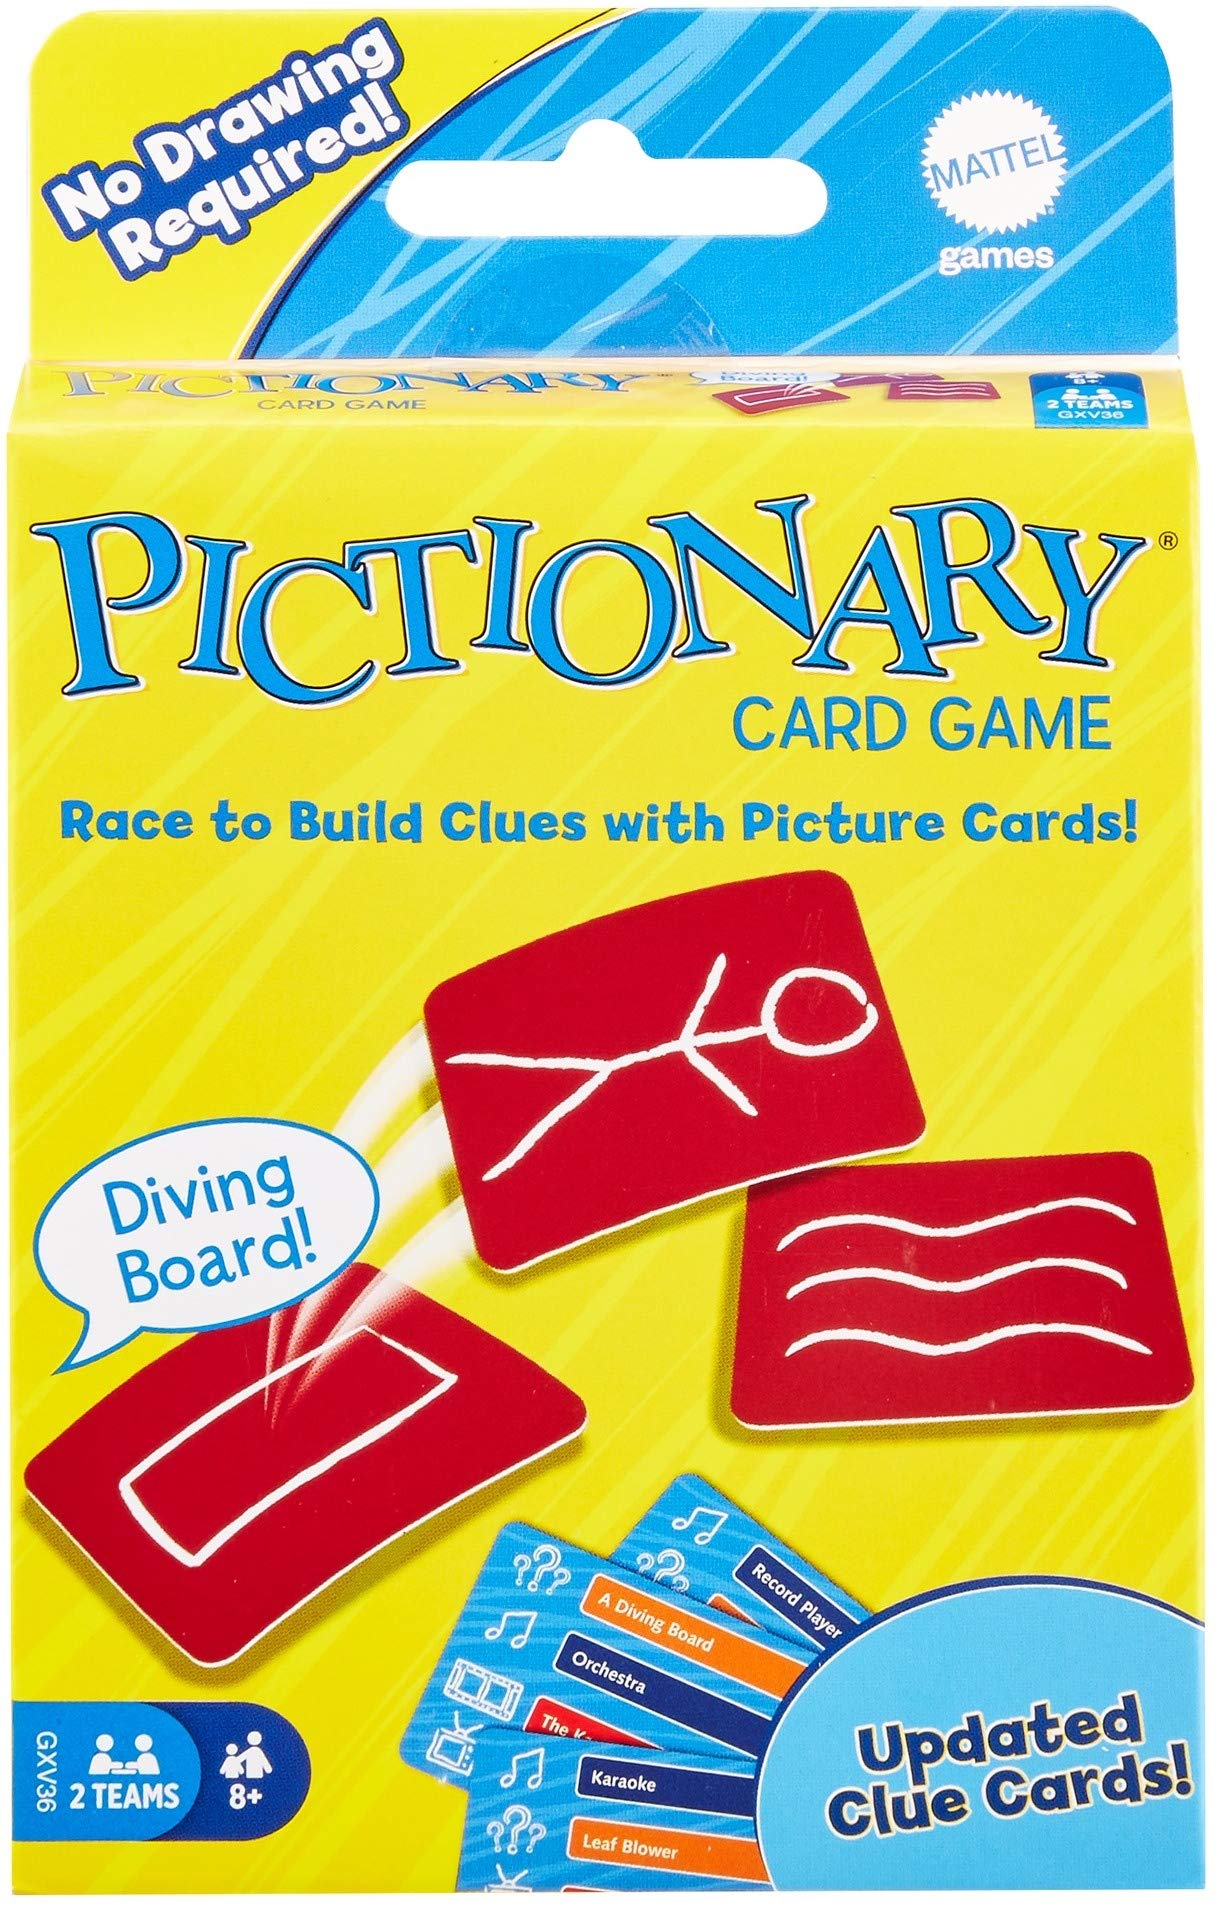 Mattel Games Pictionary Card Game, Makes a Great Gift for Kid, Family or Adult Game Night, 8 Years and Older